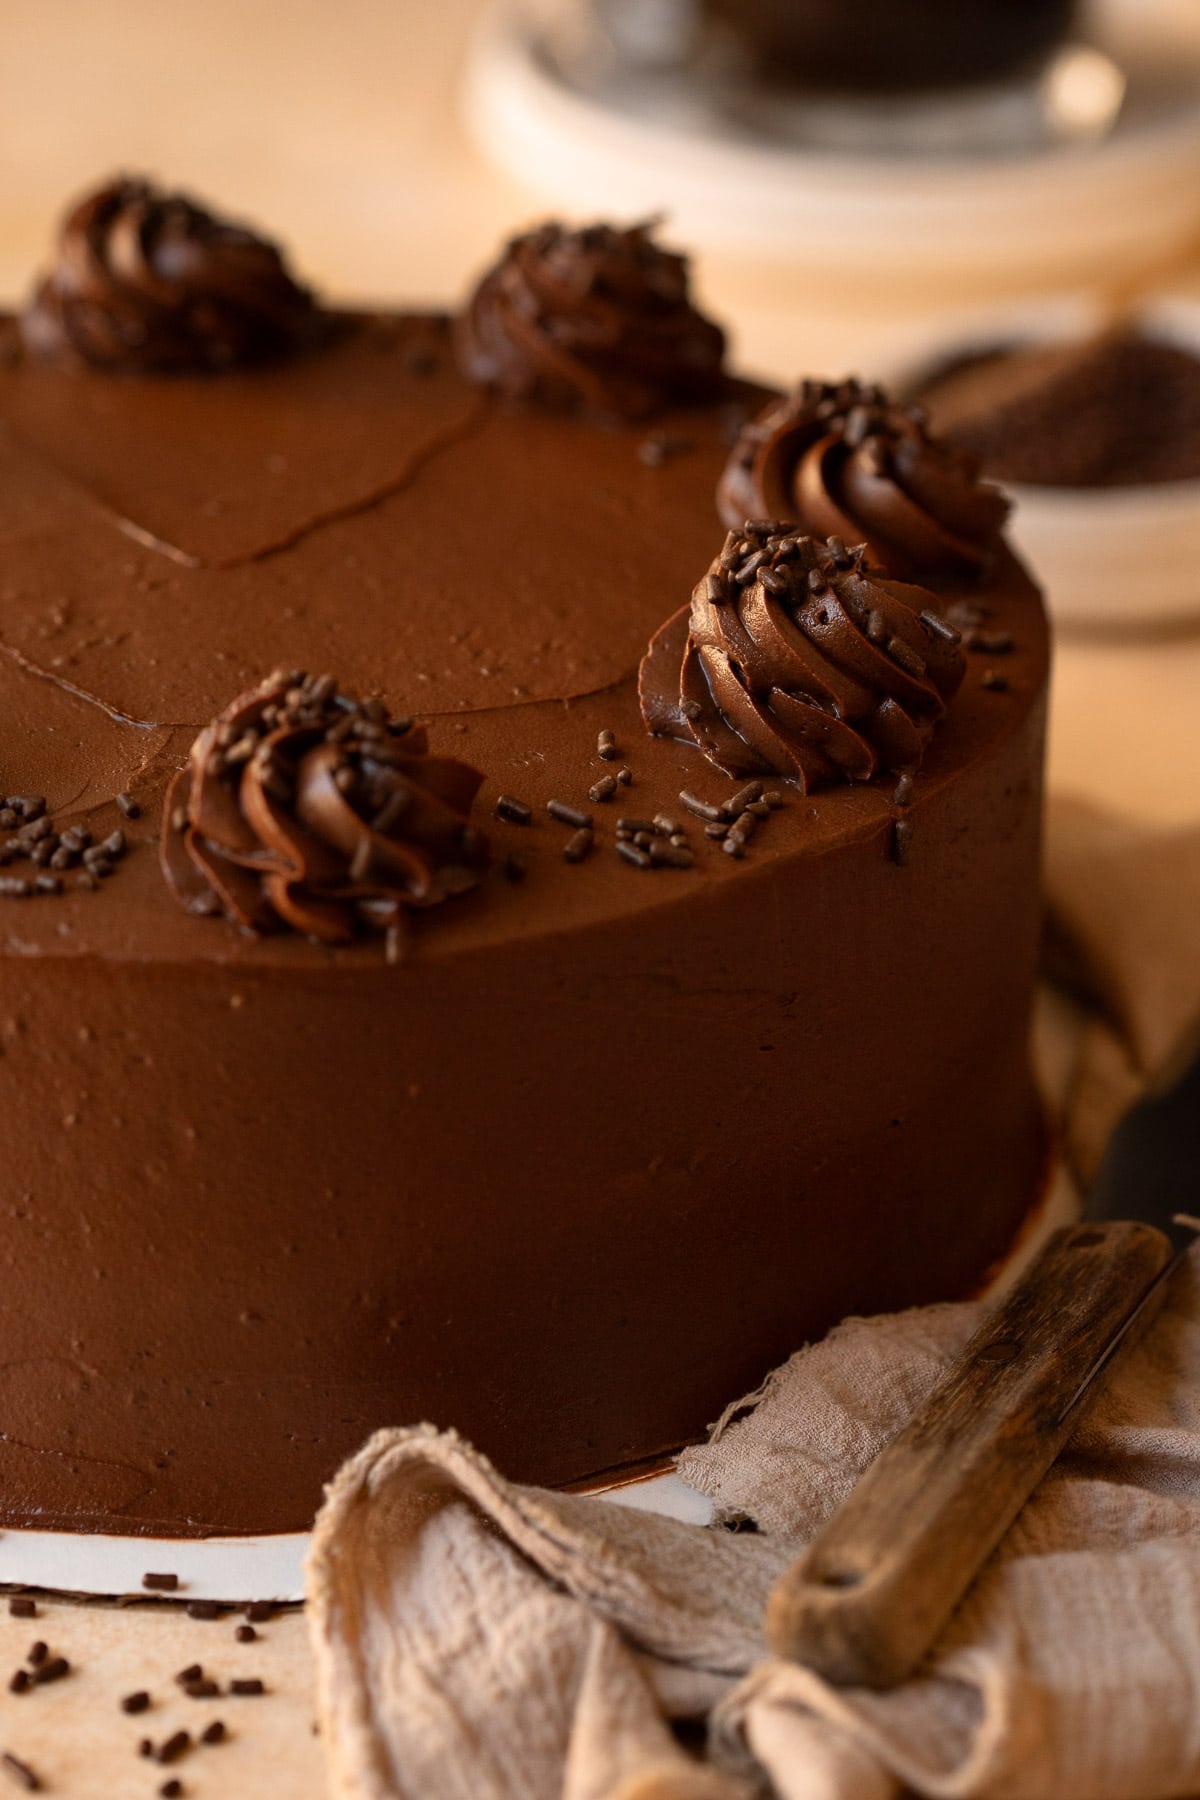 A double-layer chocolate cake topped with piped frosting and chocolate sprinkles.